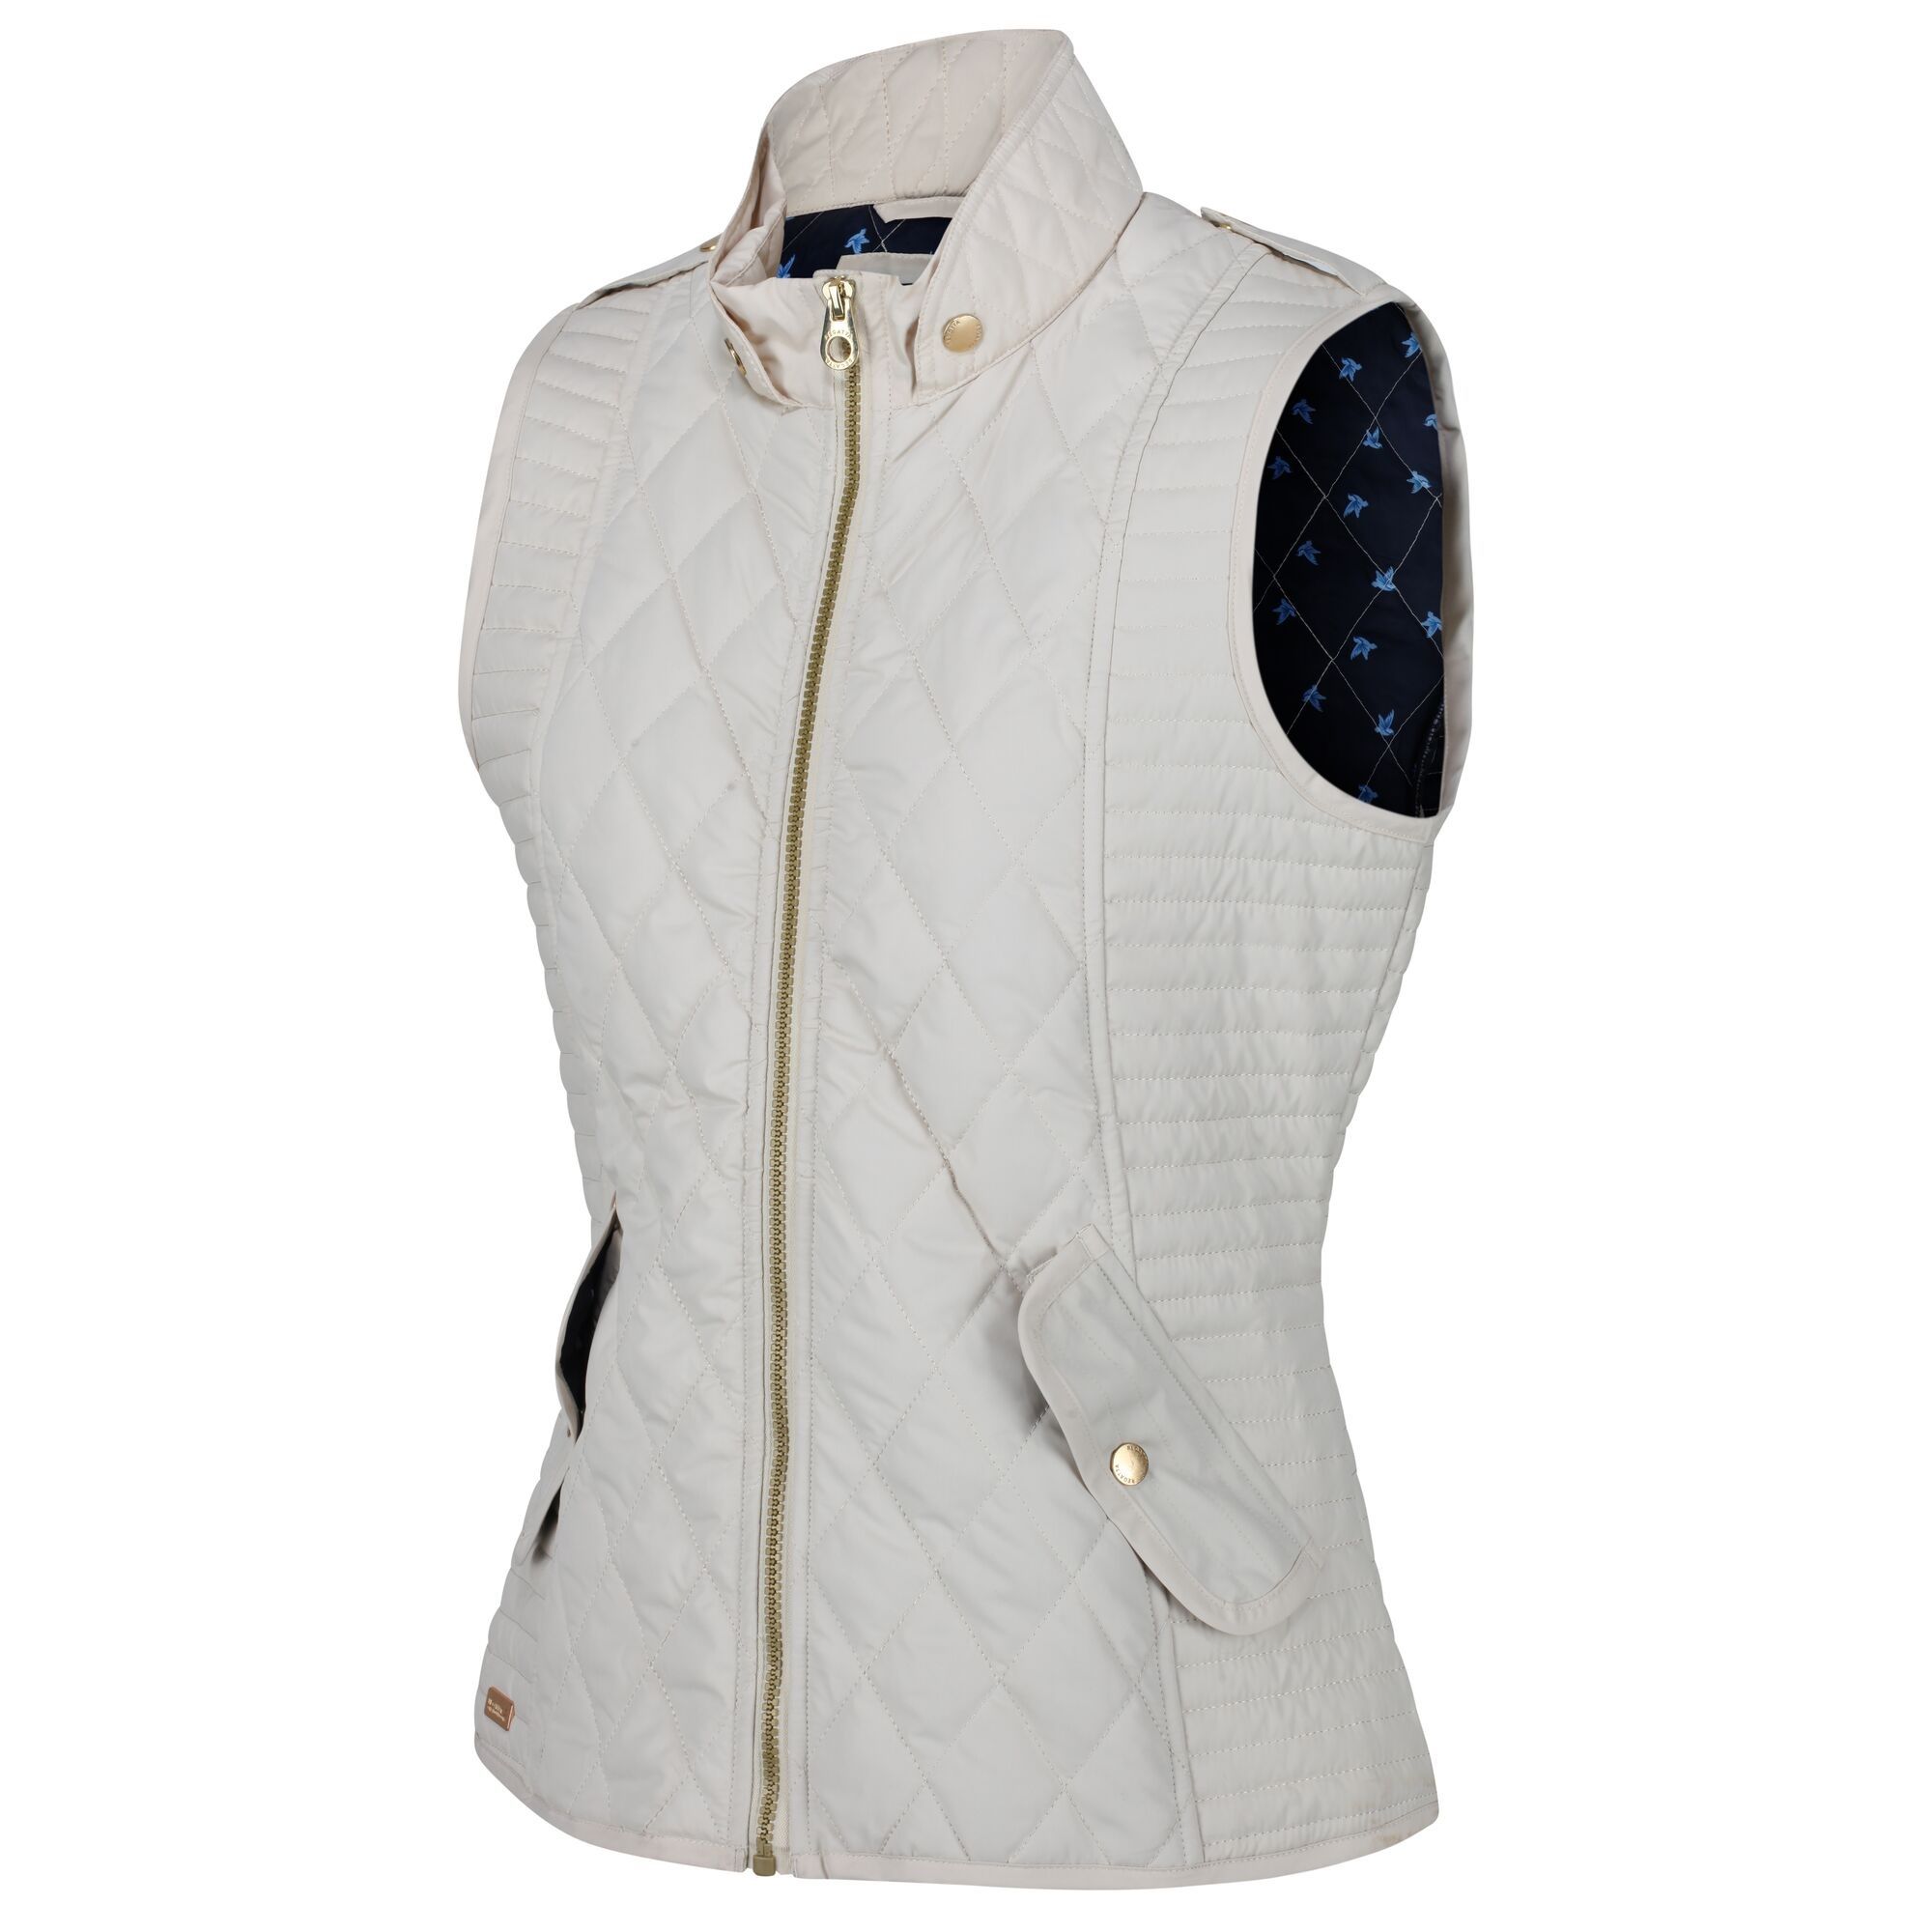 Material: 100% Polyester water repellent quilted micro poplin fabric. Thermo-Guard insulation. Printed polyester lining. 2 Lower Pockets with flaps and branded snap fastening. Back tab waist adjusters. Back vents with stud fastening.